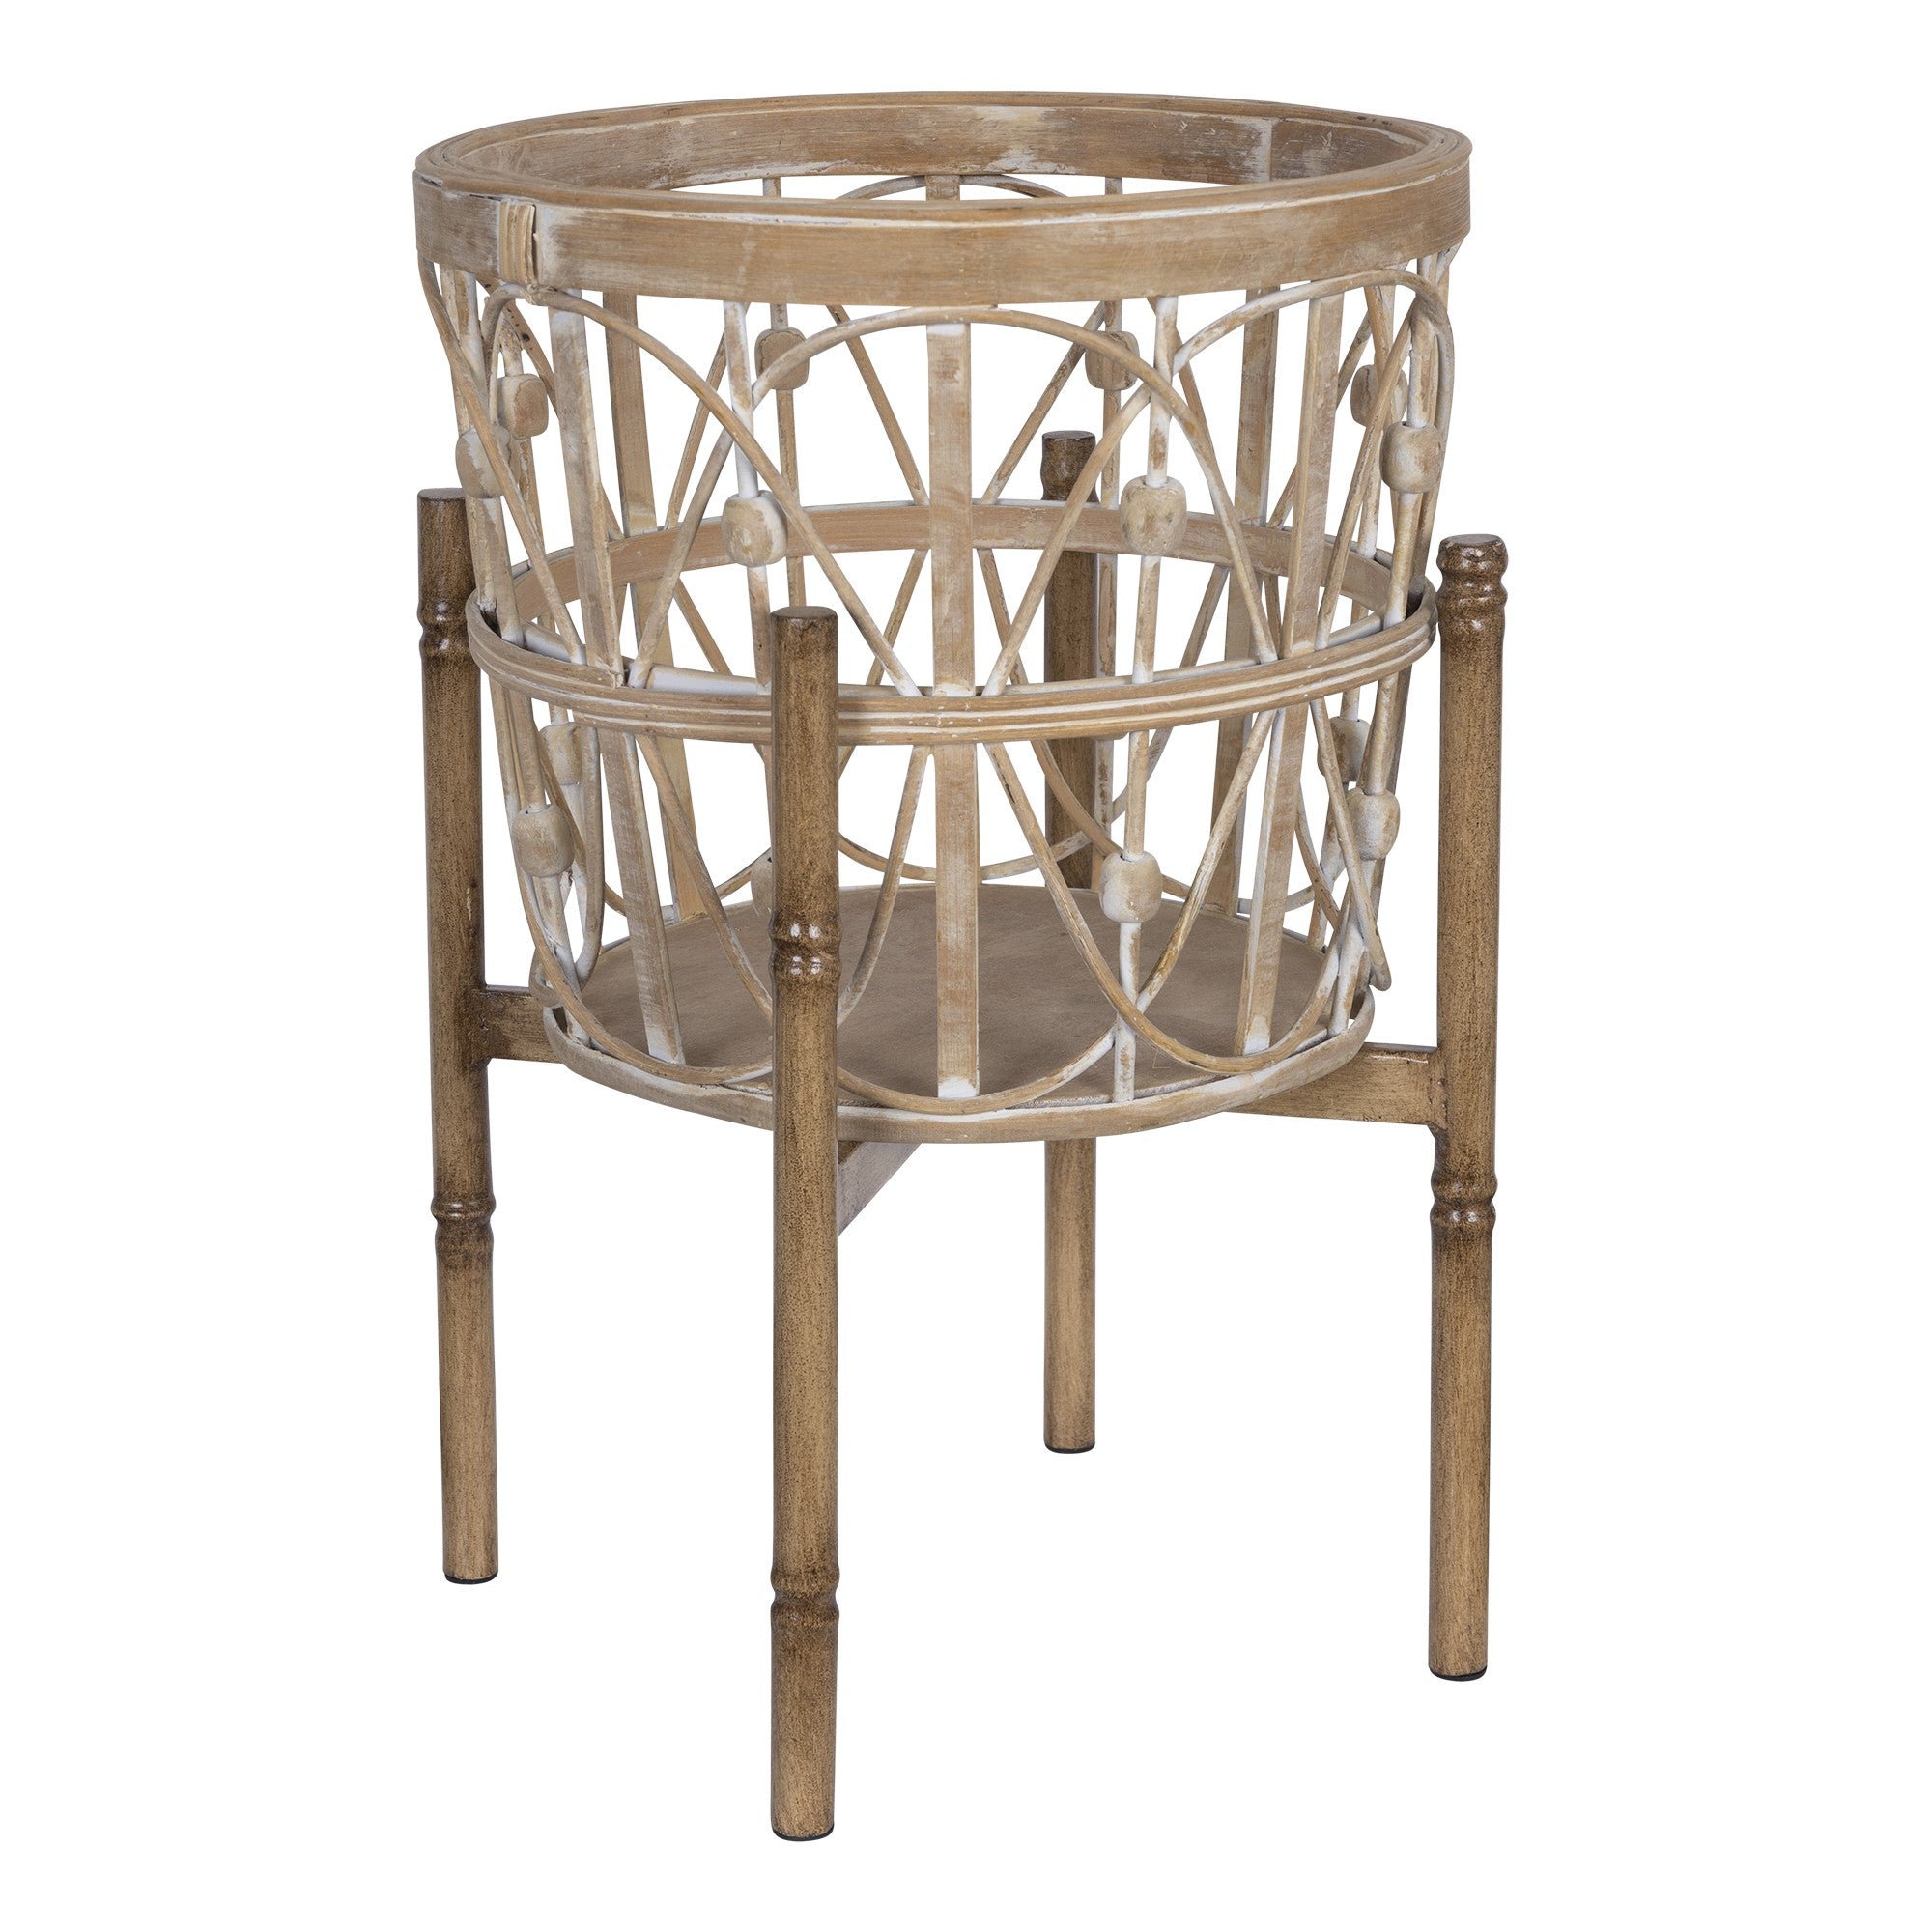 20" Brown Unavailable Round End Table